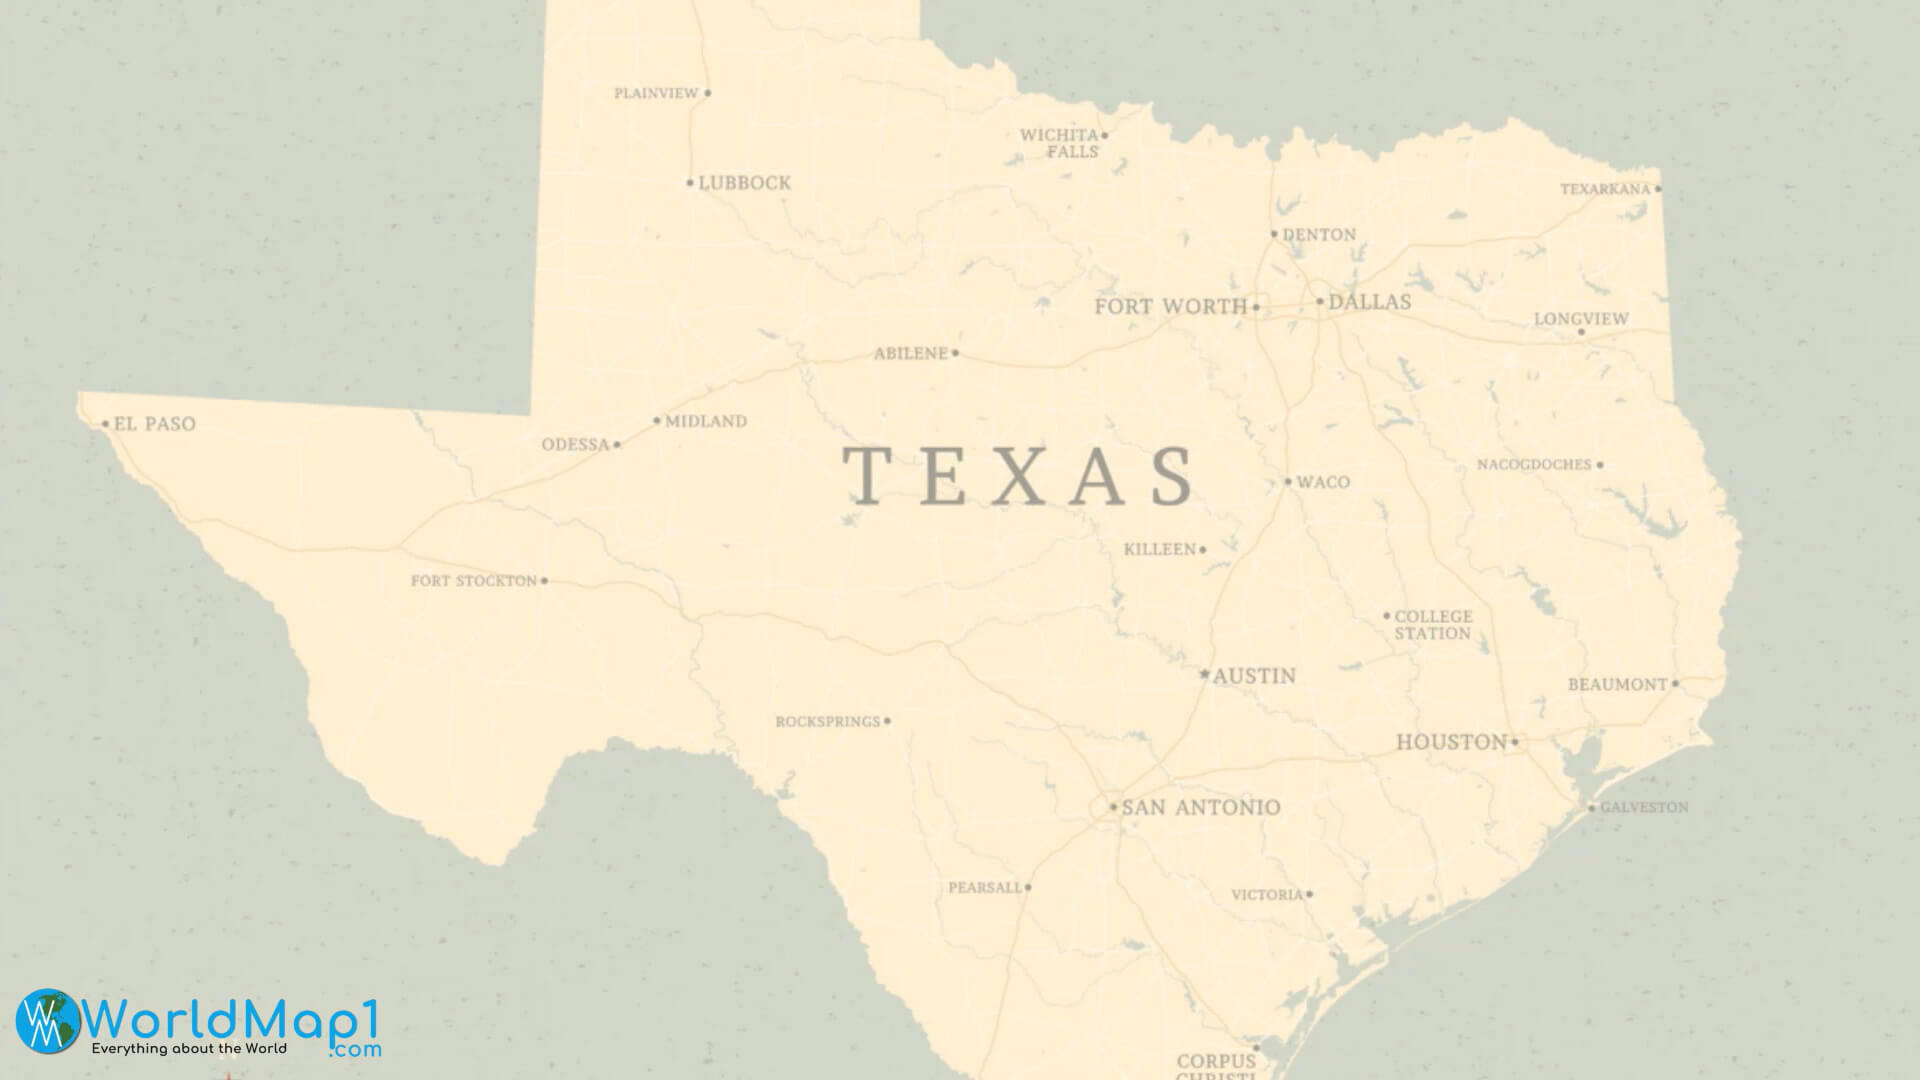 Texas Main Cities Map in th US